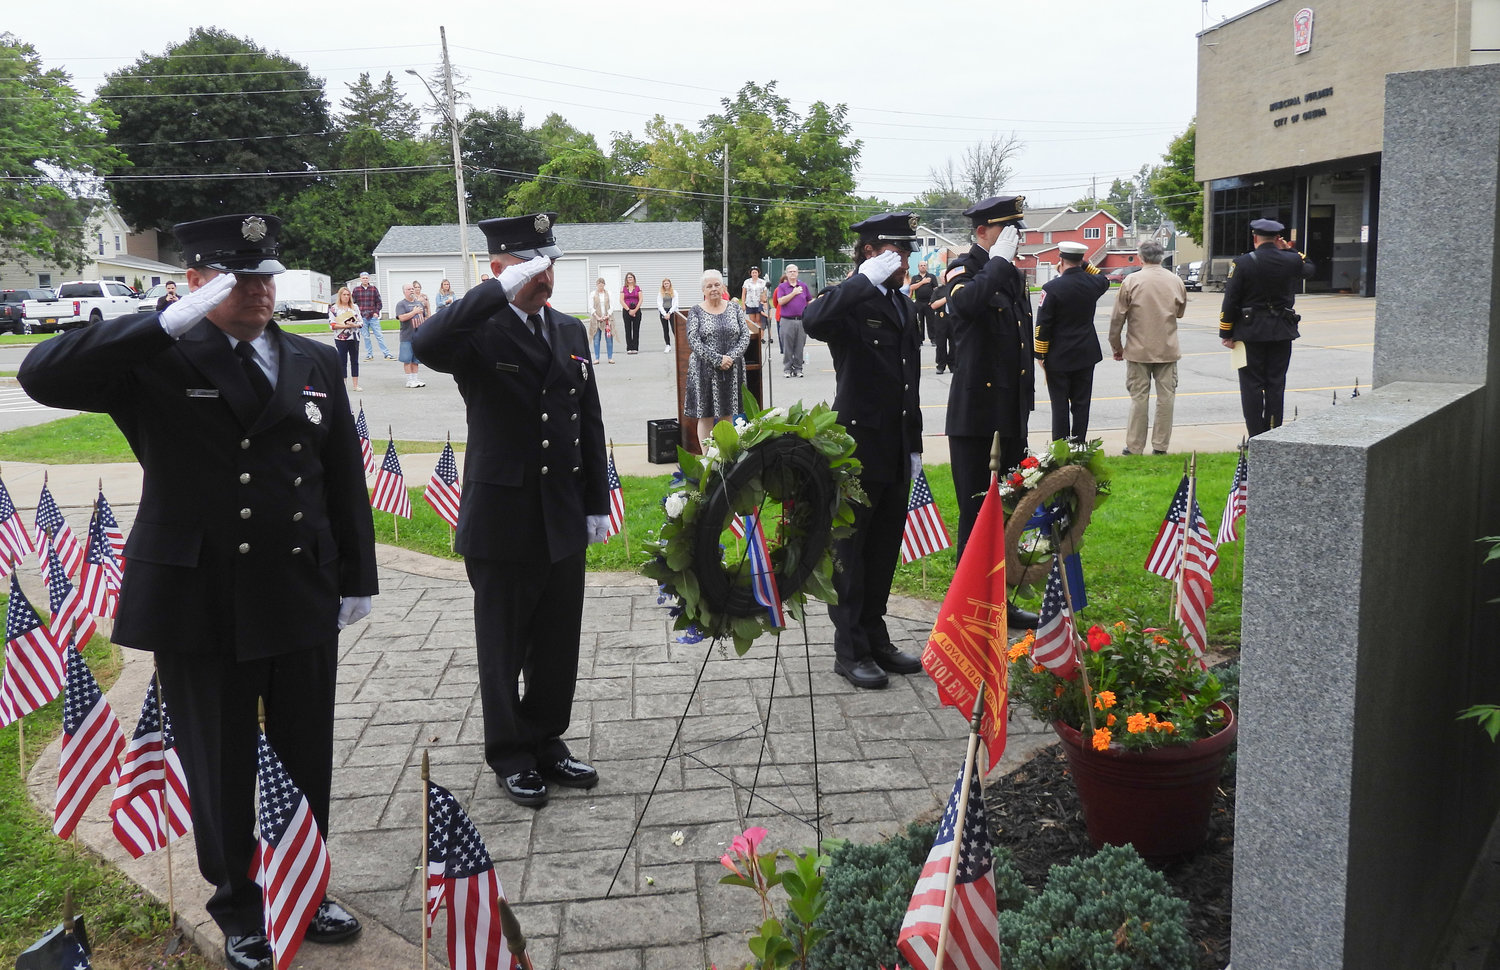 Members of the Oneida Fire Department and Oneida Police Department lay the wreaths and salute as part of the city's 9/11 Remembrance Ceremony.